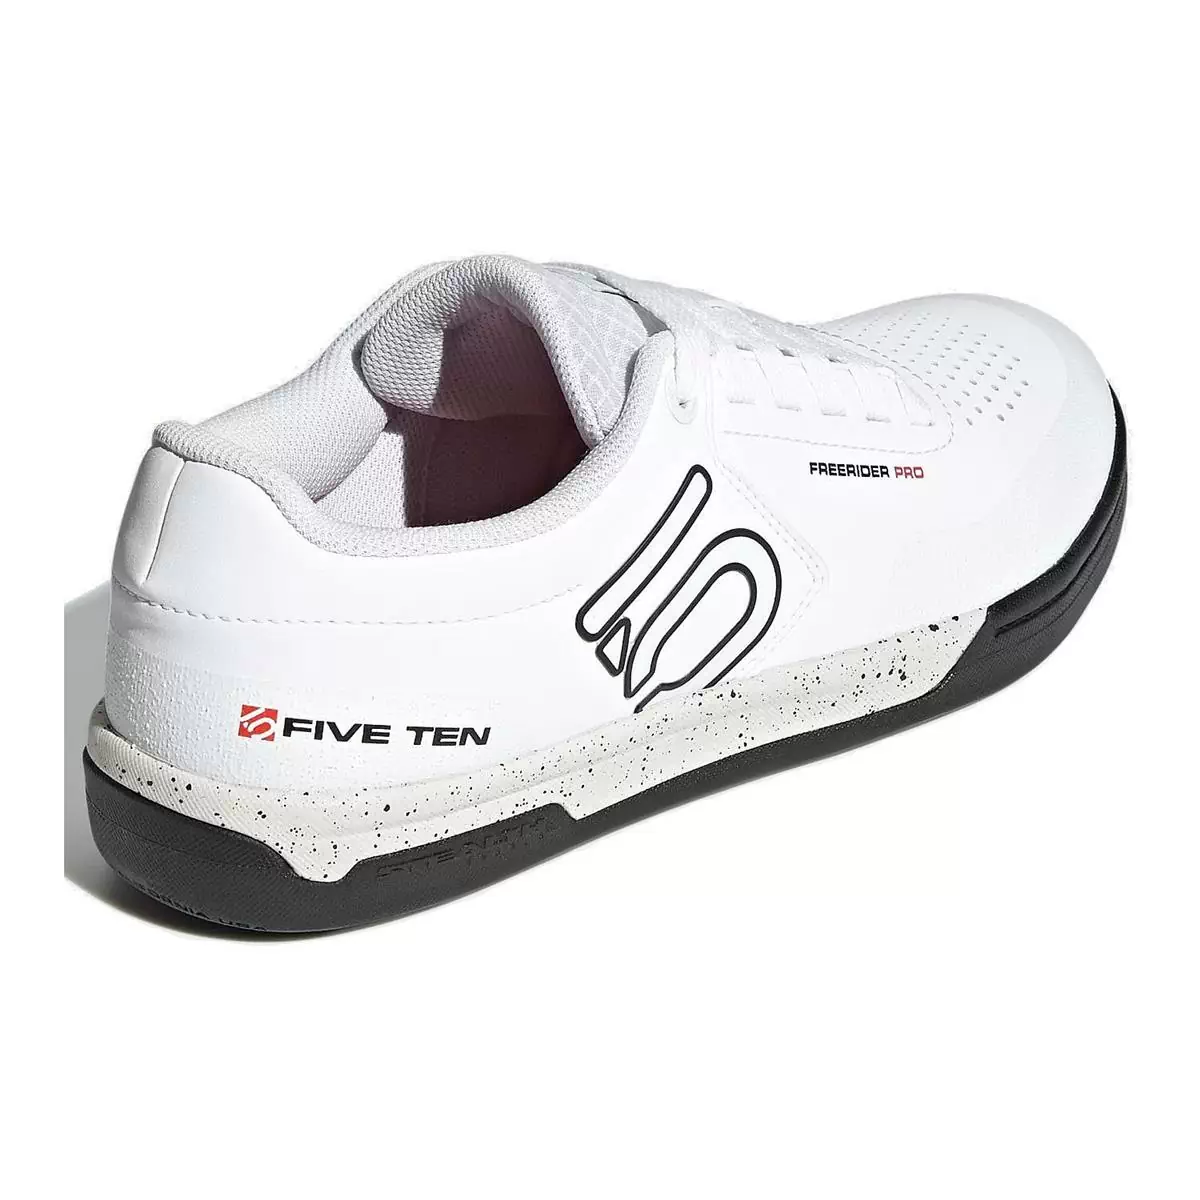 Chaussures Plates VTT Freerider Pro KYX44 Blanc Taille 39 #2